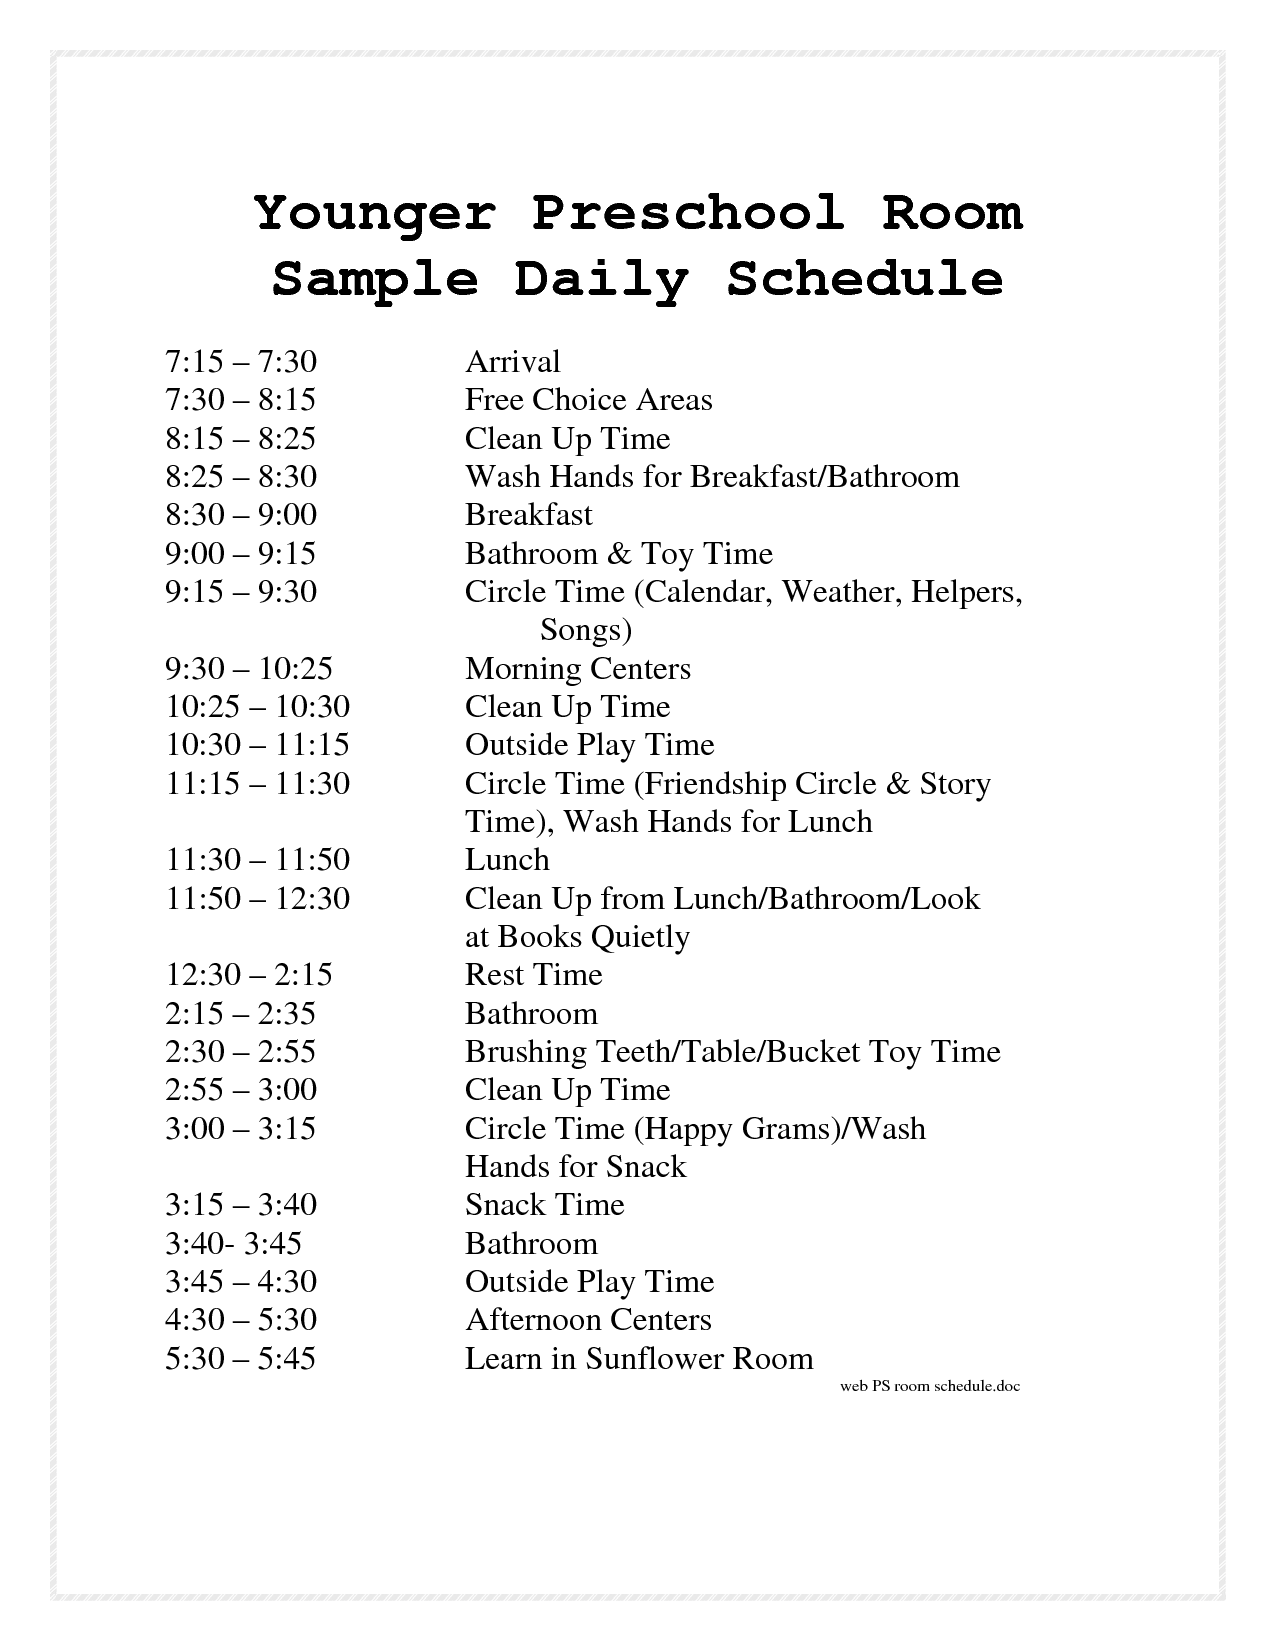 4-best-images-of-printable-preschool-daily-schedule-templates-free